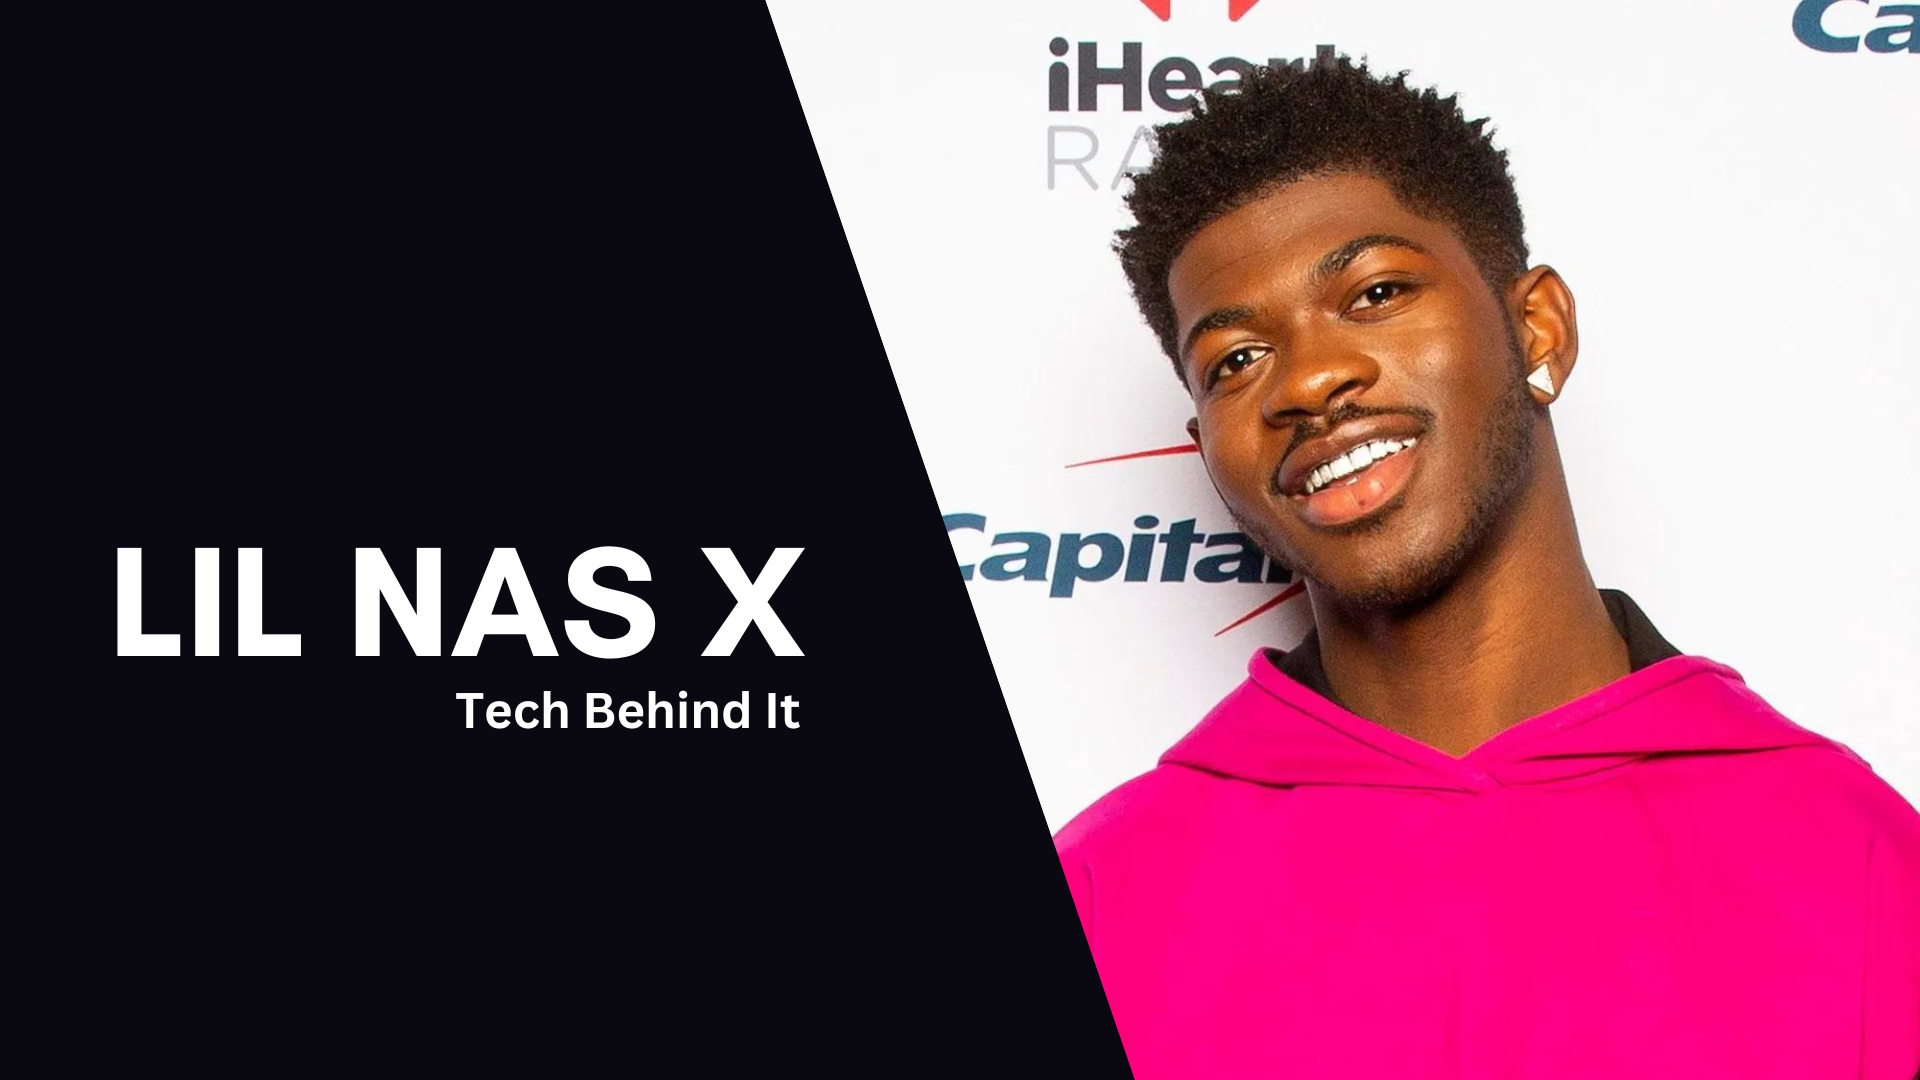 Lil Nas X: Small Town Kid to a Barrier-Breaking Superstar